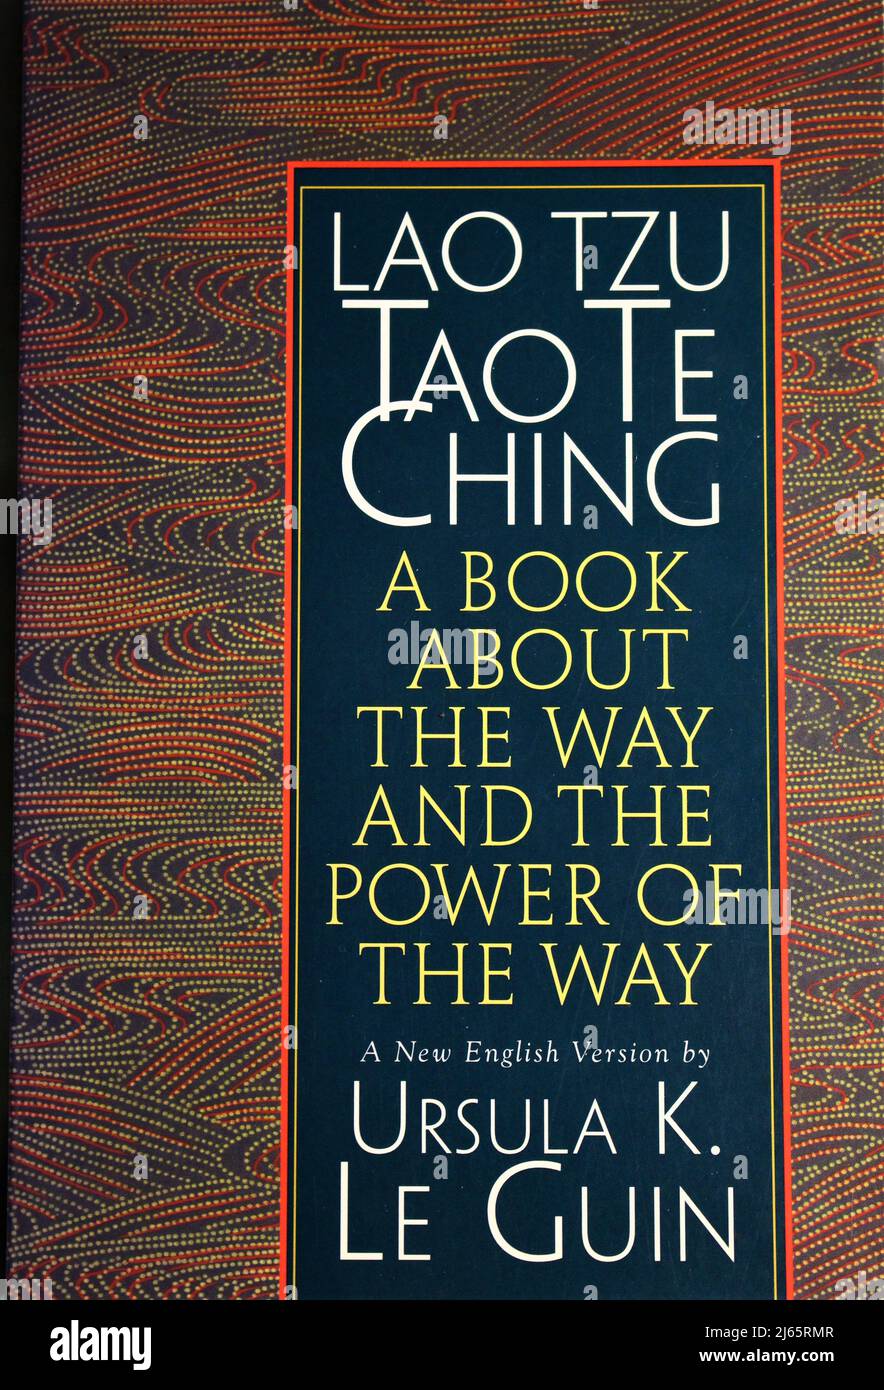 Cover of an English translation of the Tao Te Ching. Text originally written by Taoist philosopher Lao Tzu, English edition by Ursula K le Guin. Stock Photo